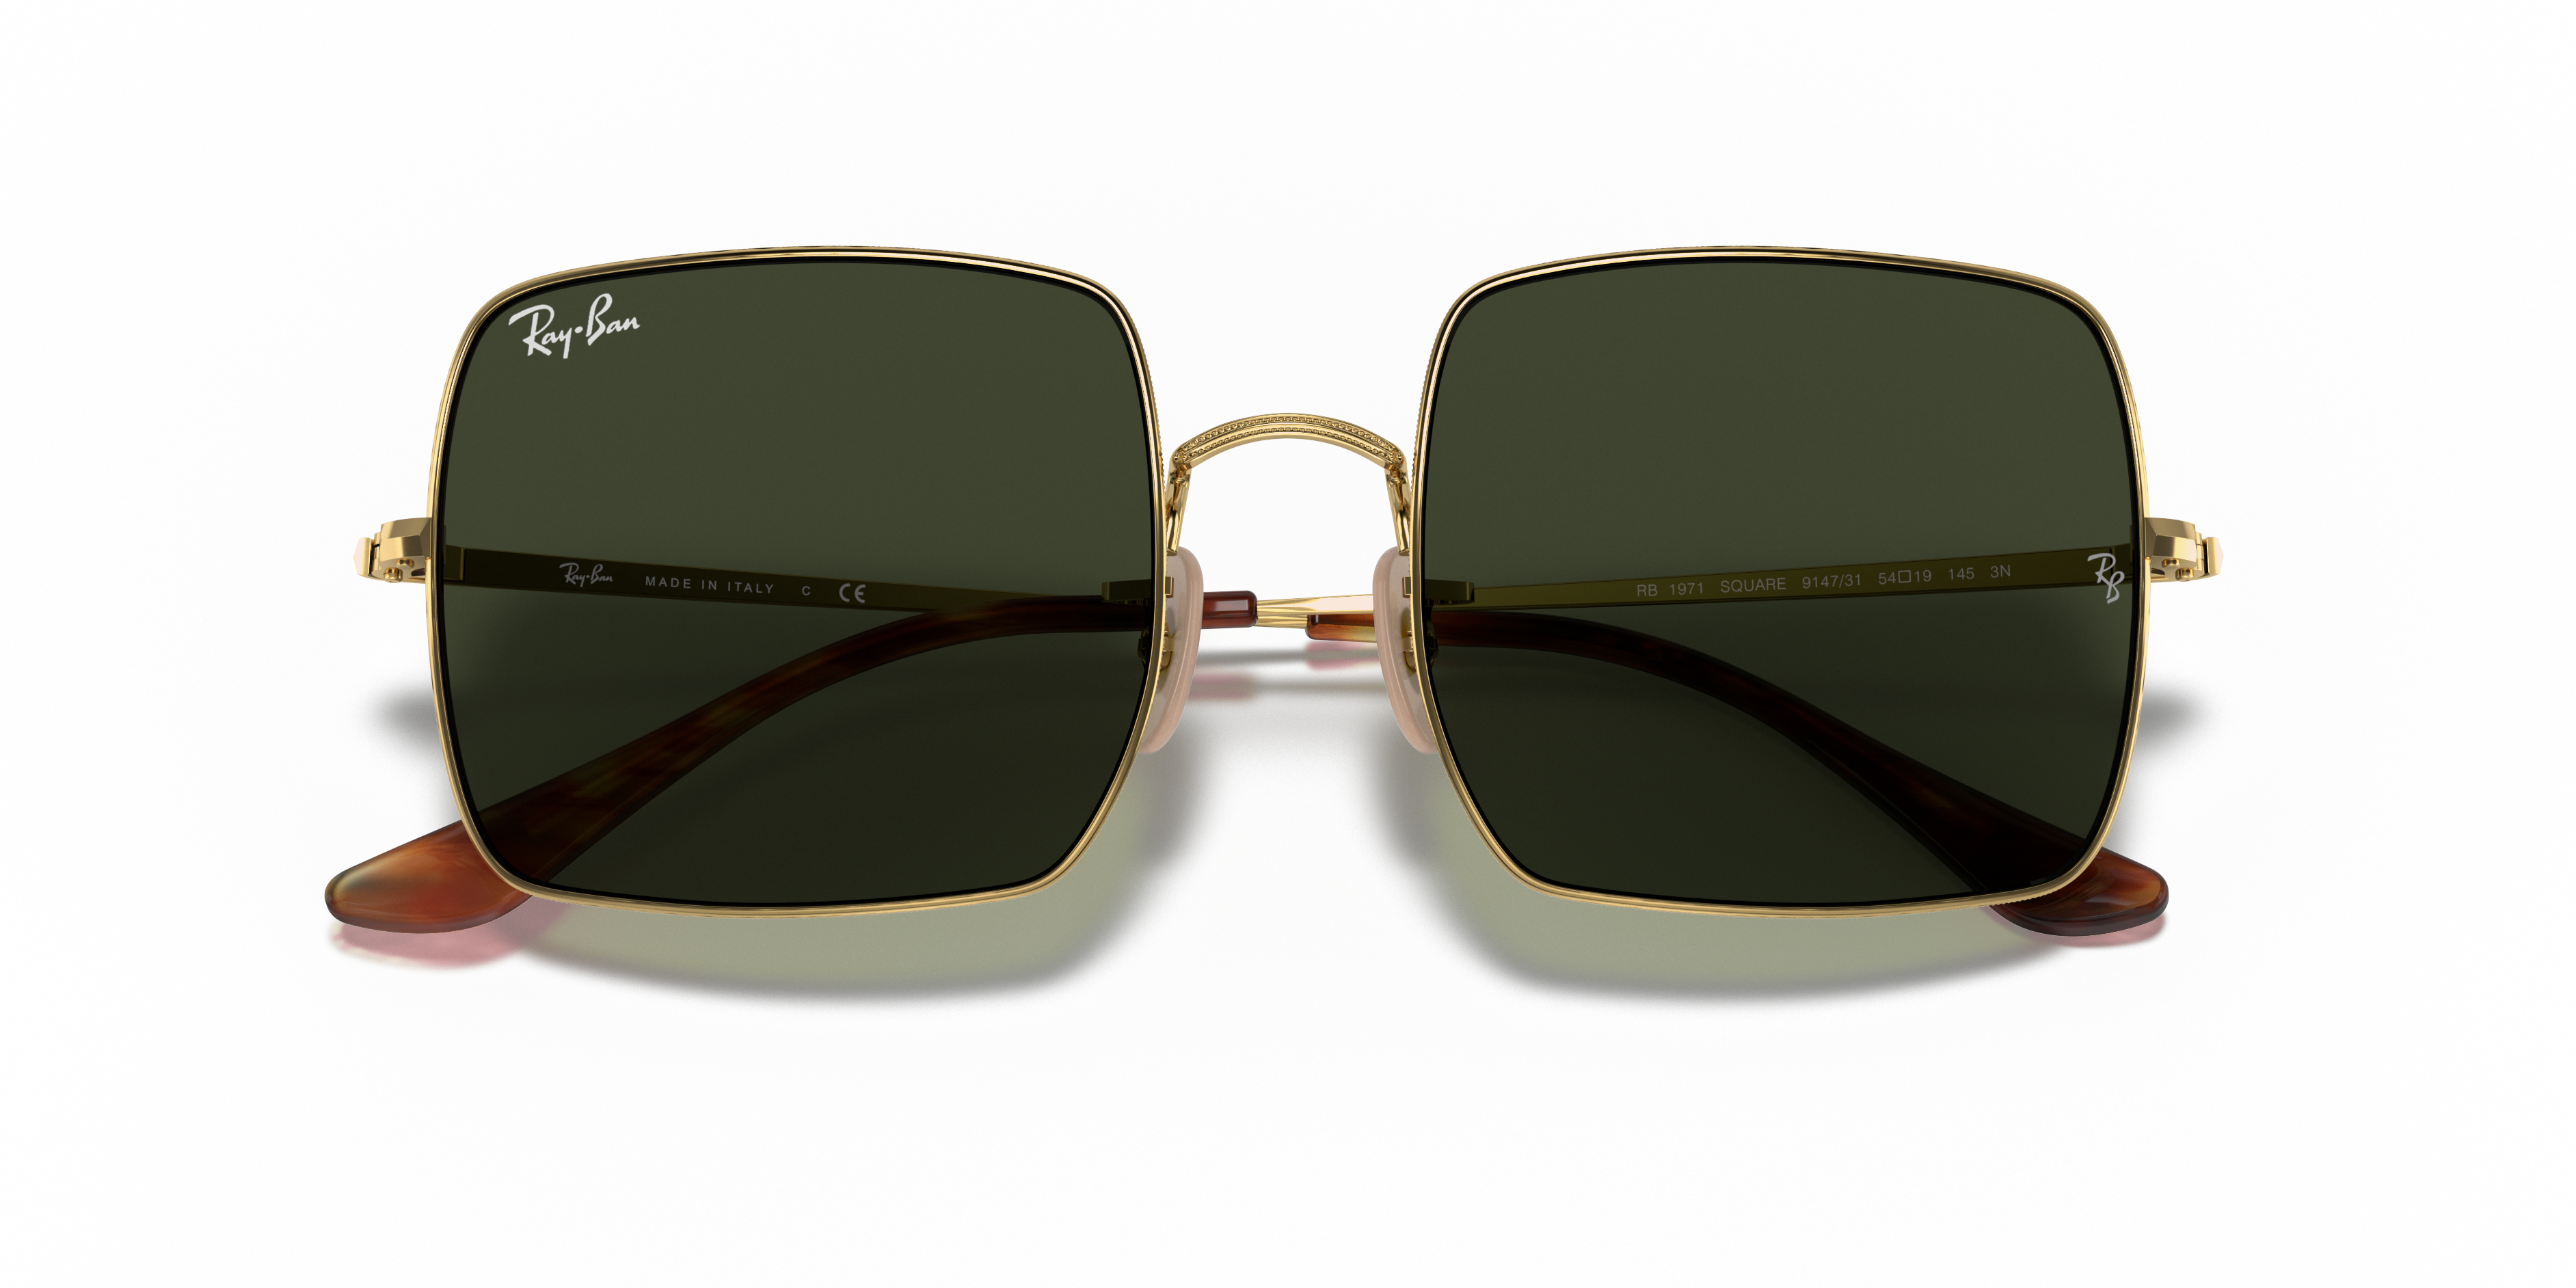 Square 1971 Classic Sunglasses in Gold and Green | Ray-Ban®